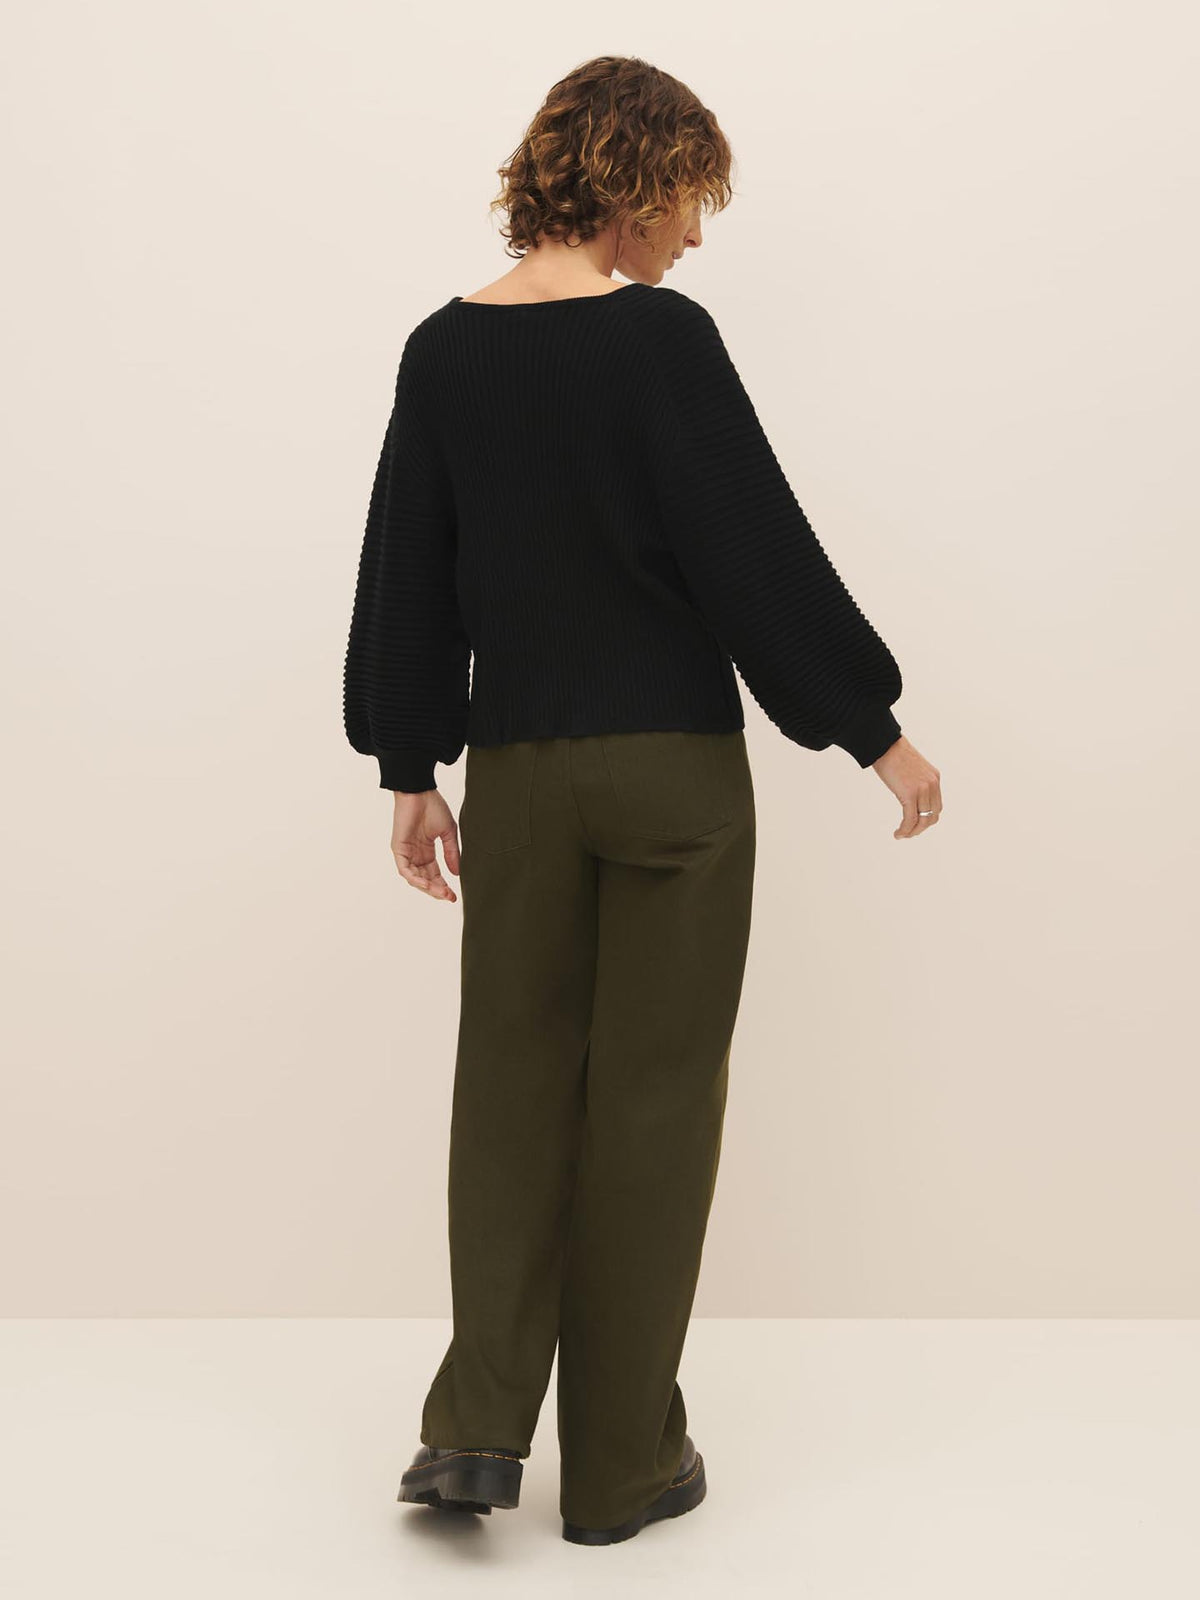 Woman standing with her back to the camera wearing a Kowtow Cassia Sweater in Black and green trousers.